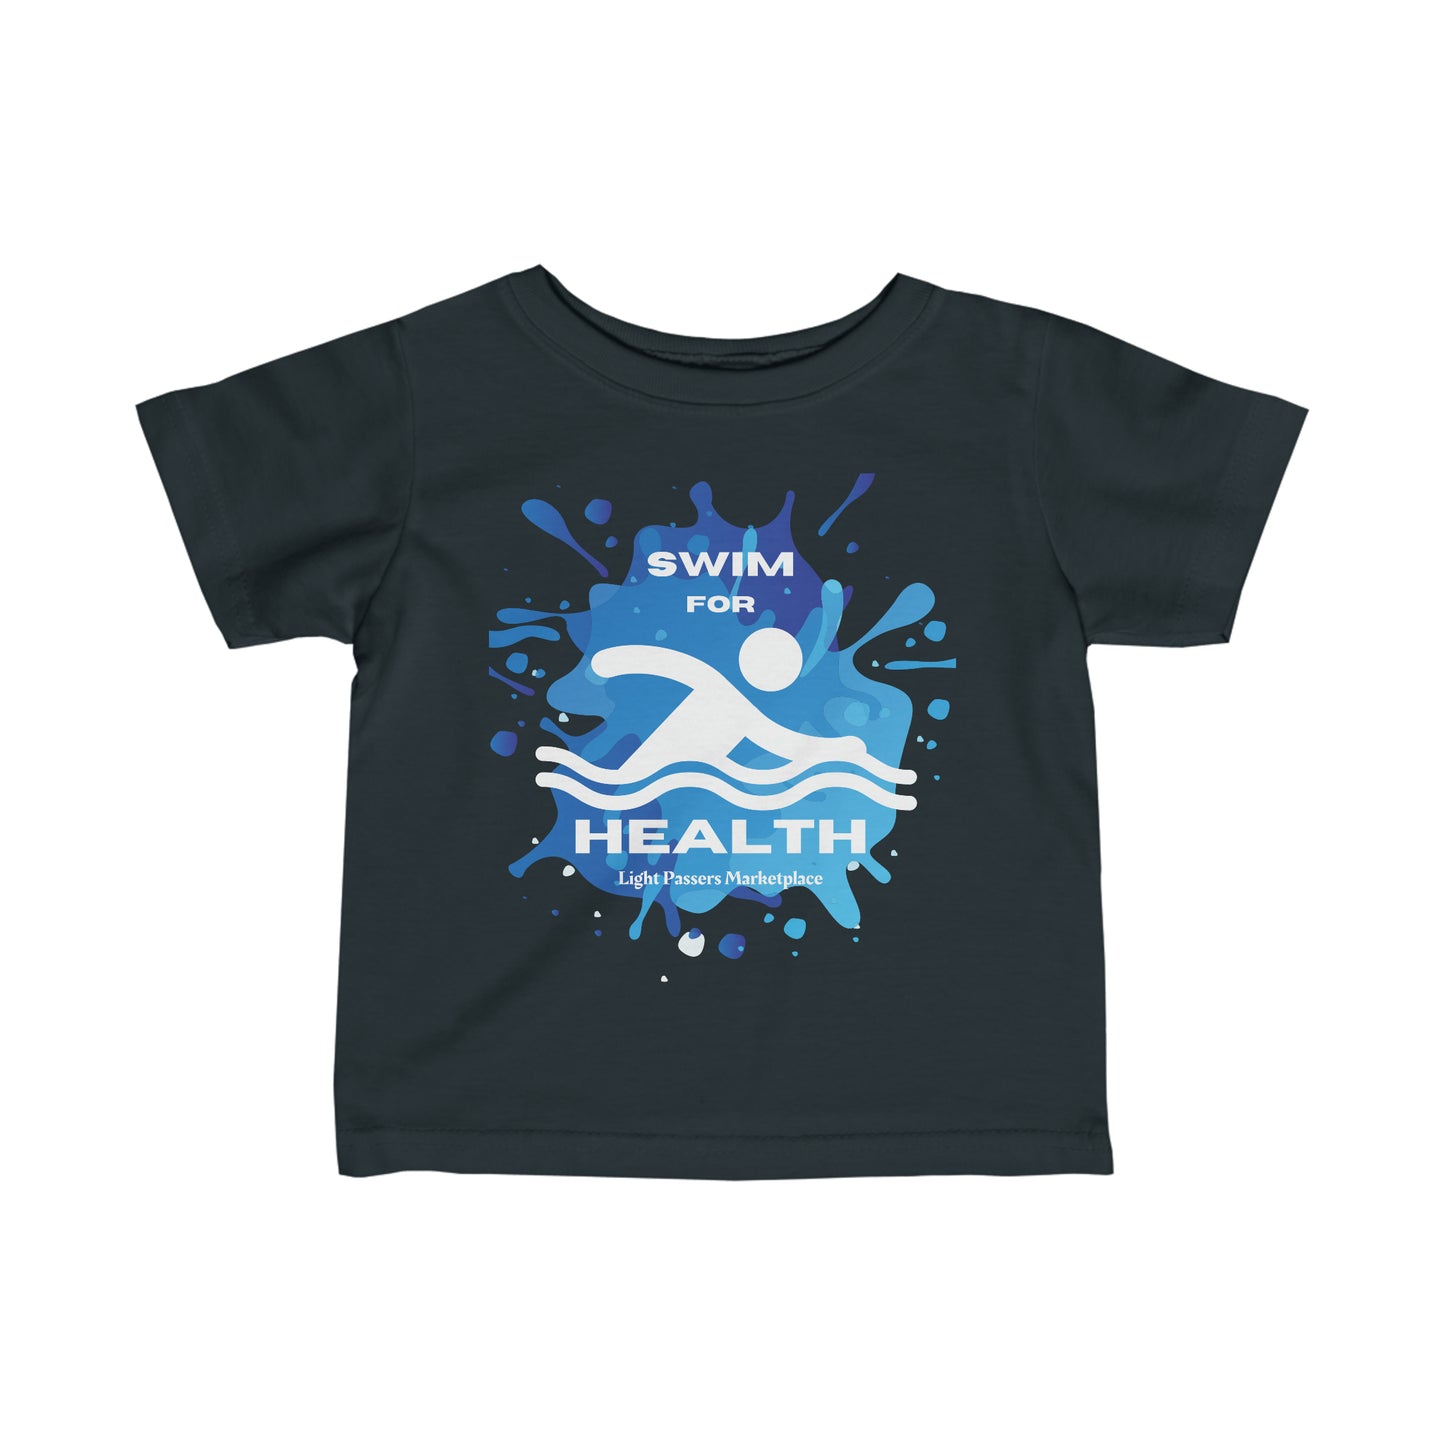 Light Passers Marketplace Swim for Health Baby T-shirts Fitness, Simple Messages